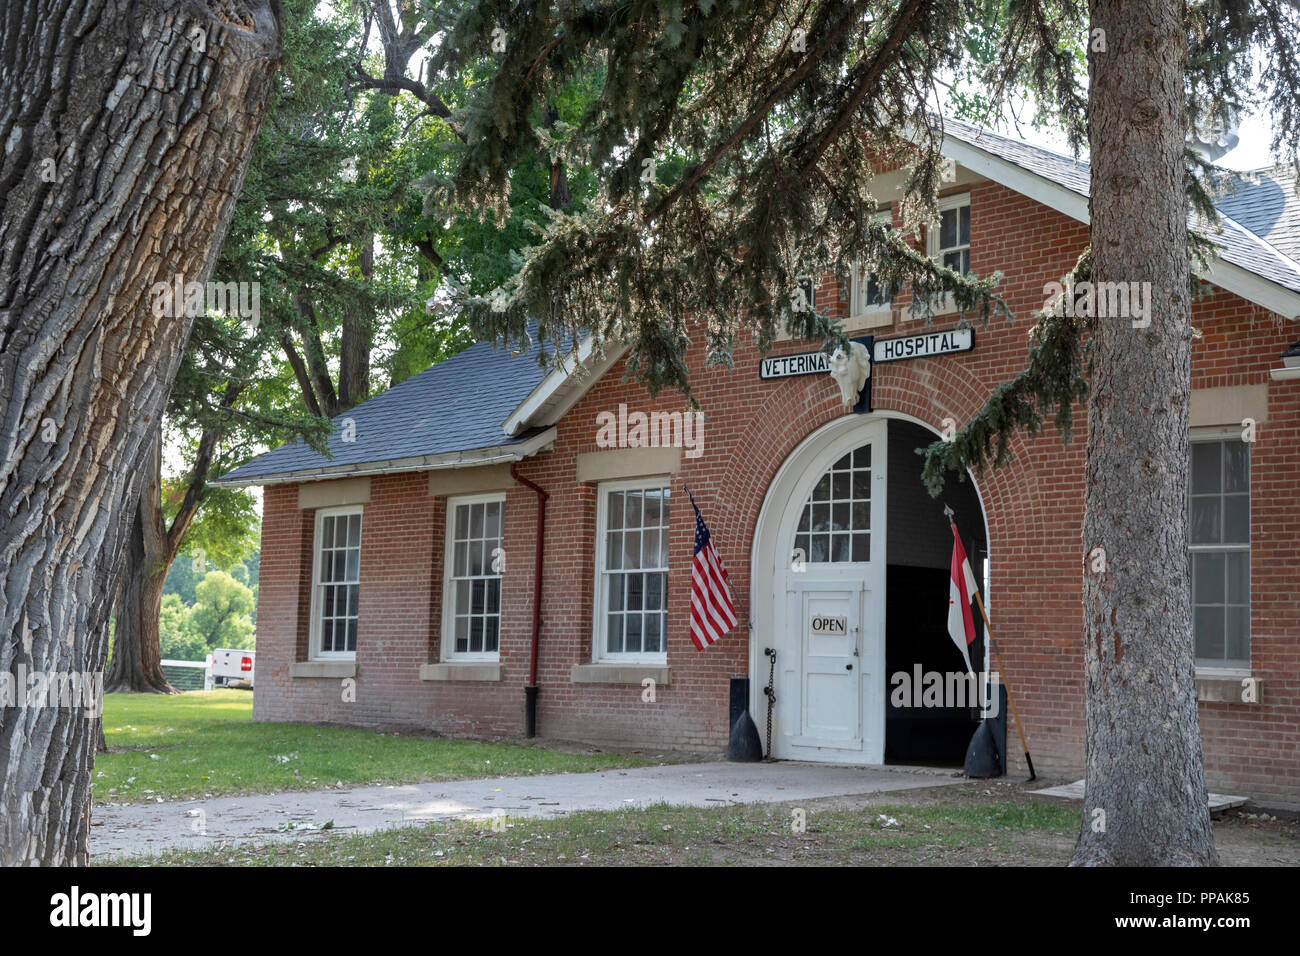 Crawford, Nebraska - The Veterinary Hospital at Fort Robinson State Park. Fort Robinson is a former U.S. Army outpost which played a major role in the Stock Photo